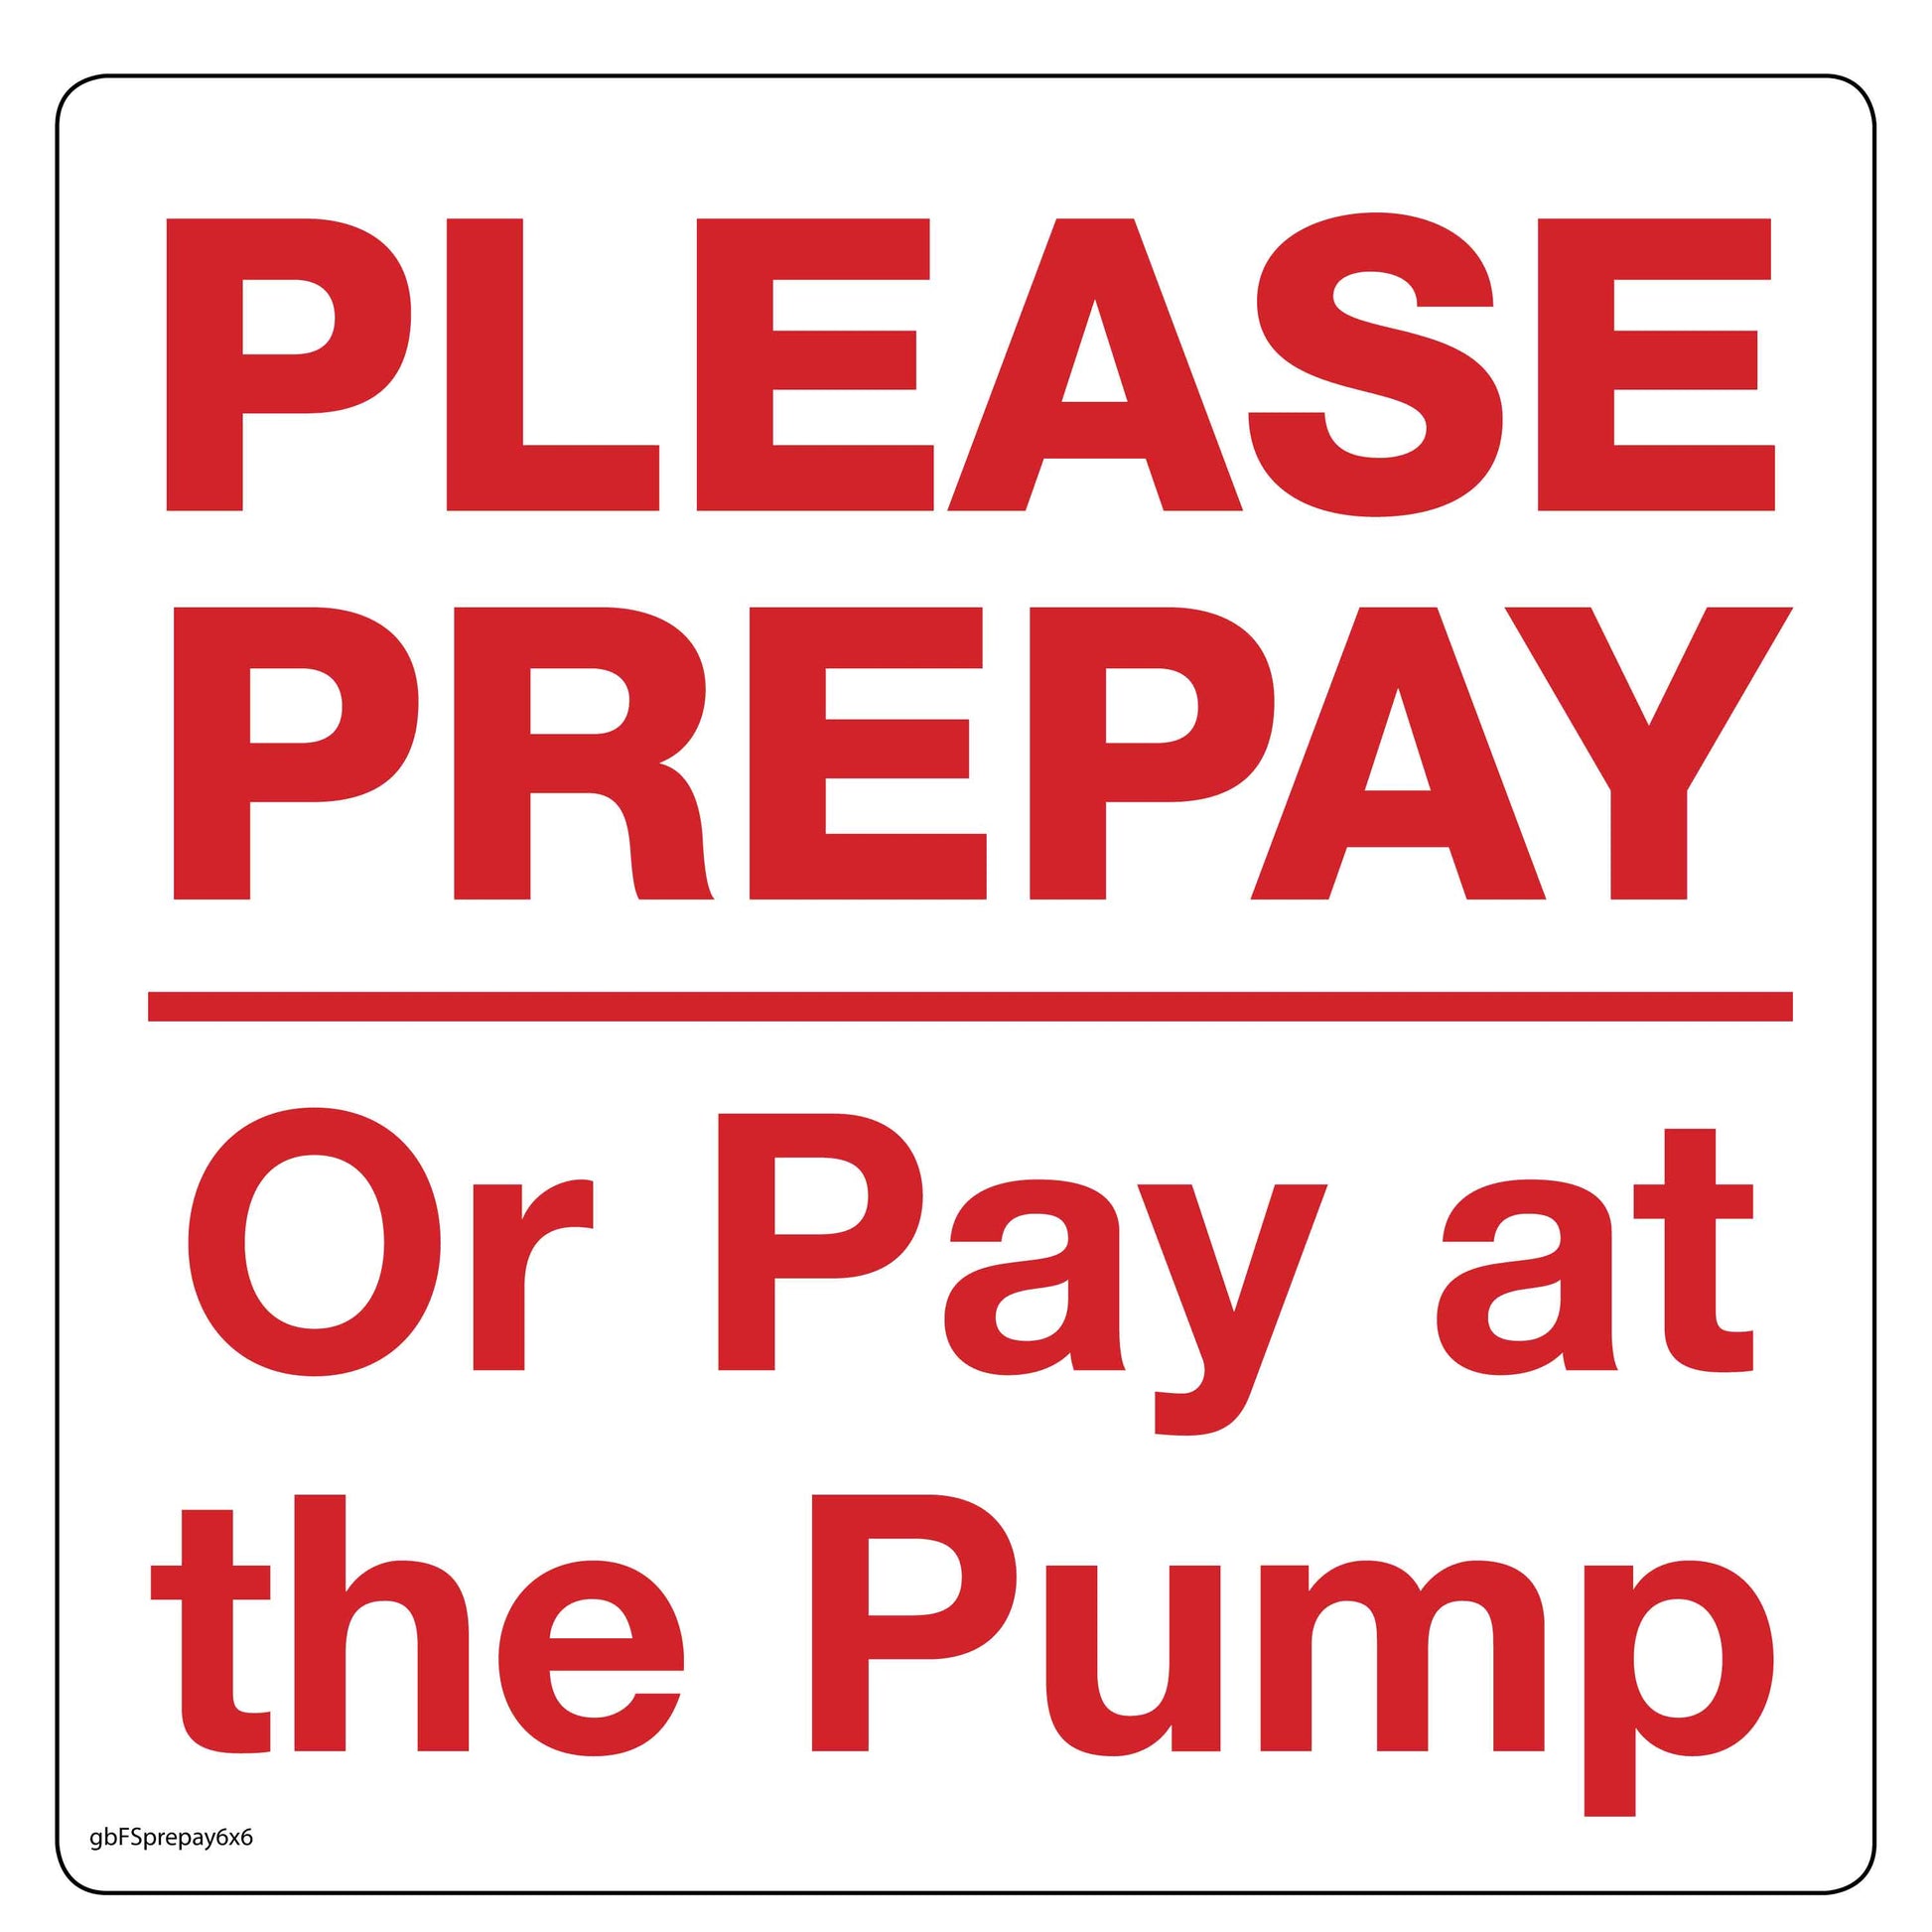 Please Prepay Or Pay At The Pump Decal. 6 inches by 6 inches in size. 